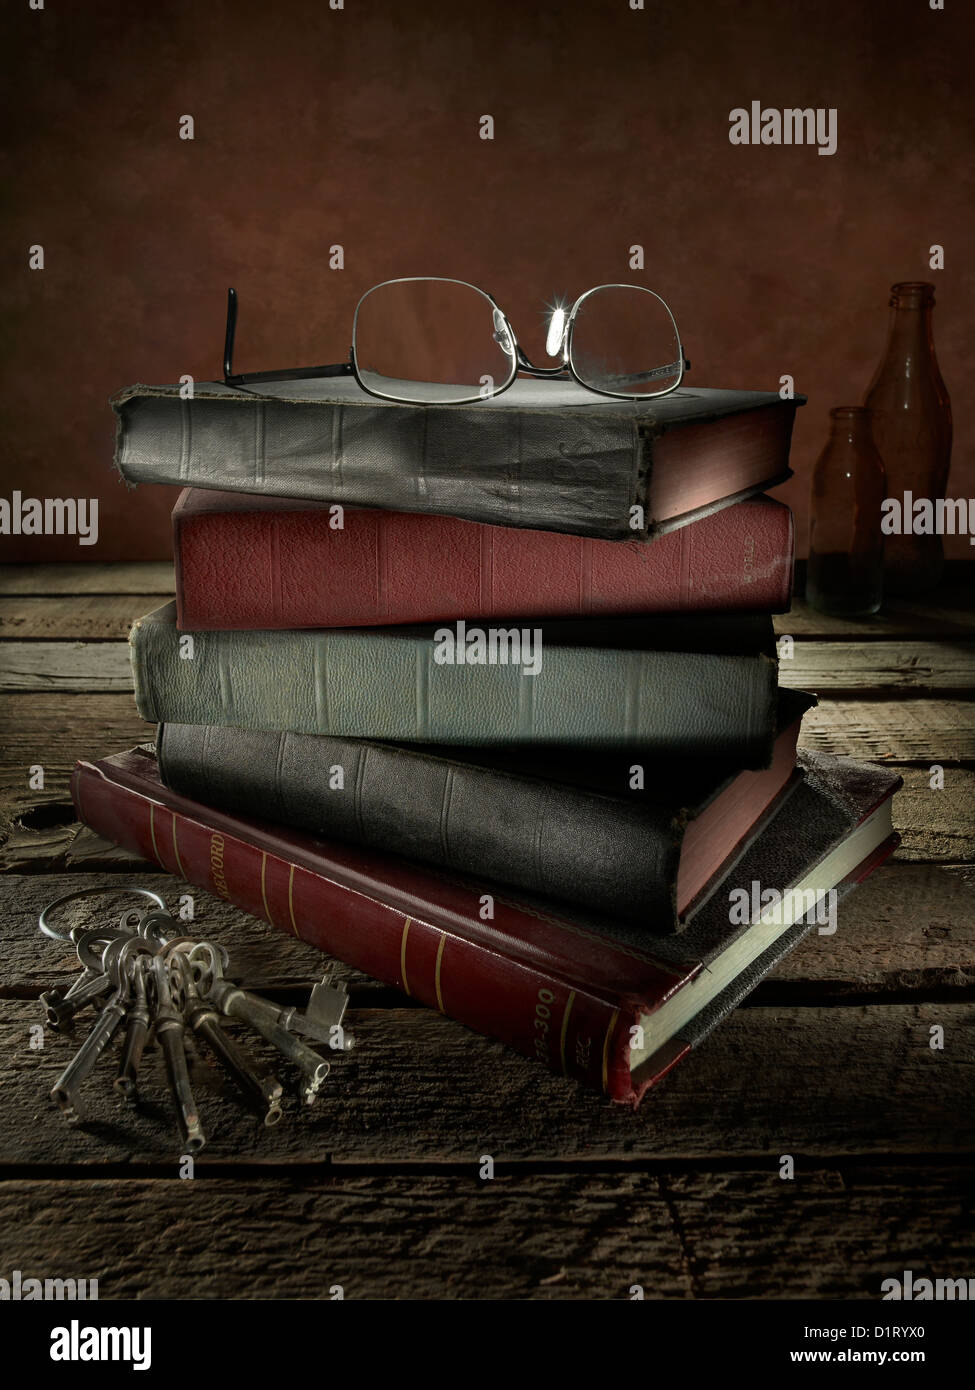 Old Dusty Books & Reading Glasses Stock Photo